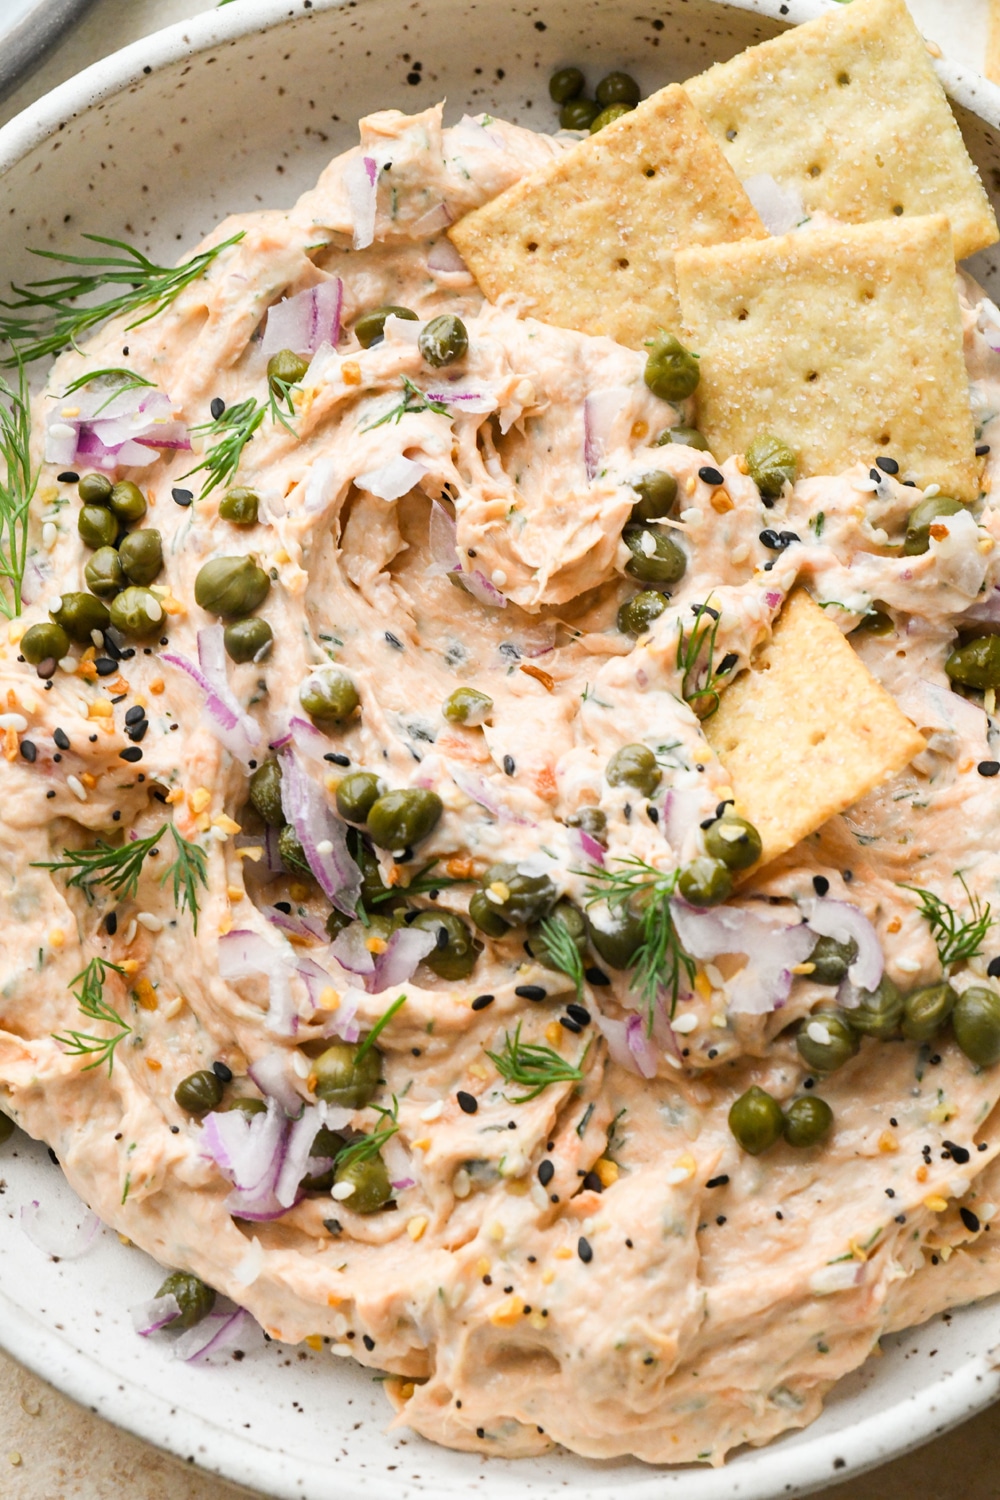 Dairy free smoked salmon dip in a shallow bowl topped with garnishes, after a cracker has scooped some of the dip out of the bowl.